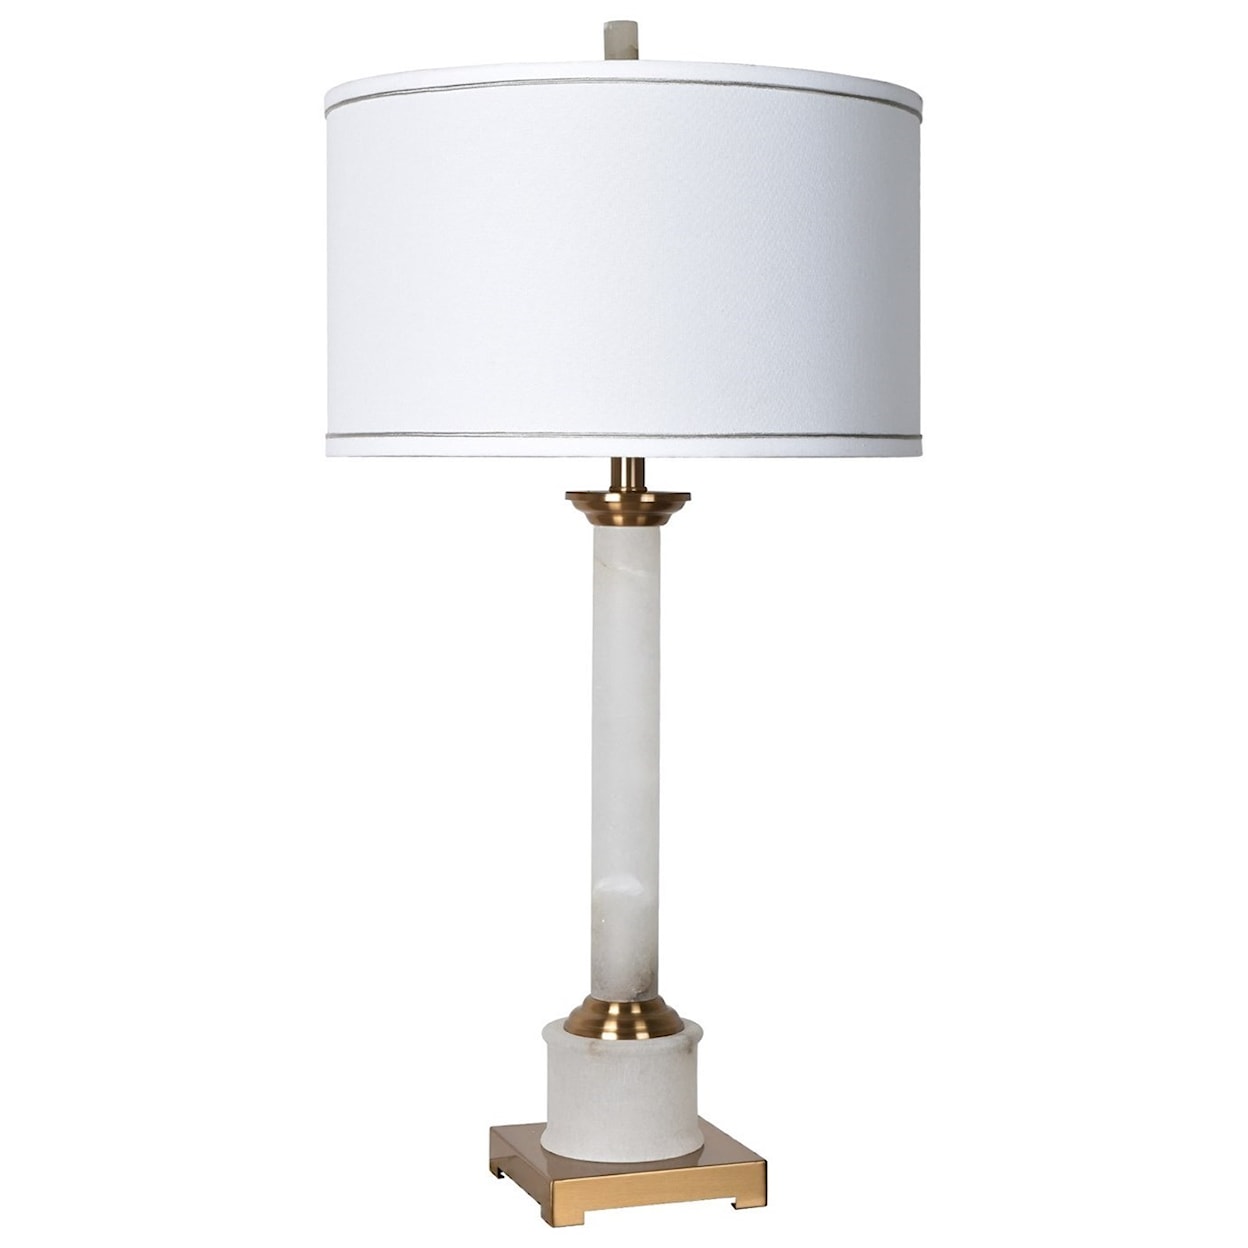 Crestview Collection Lighting Hilton Table Lamp